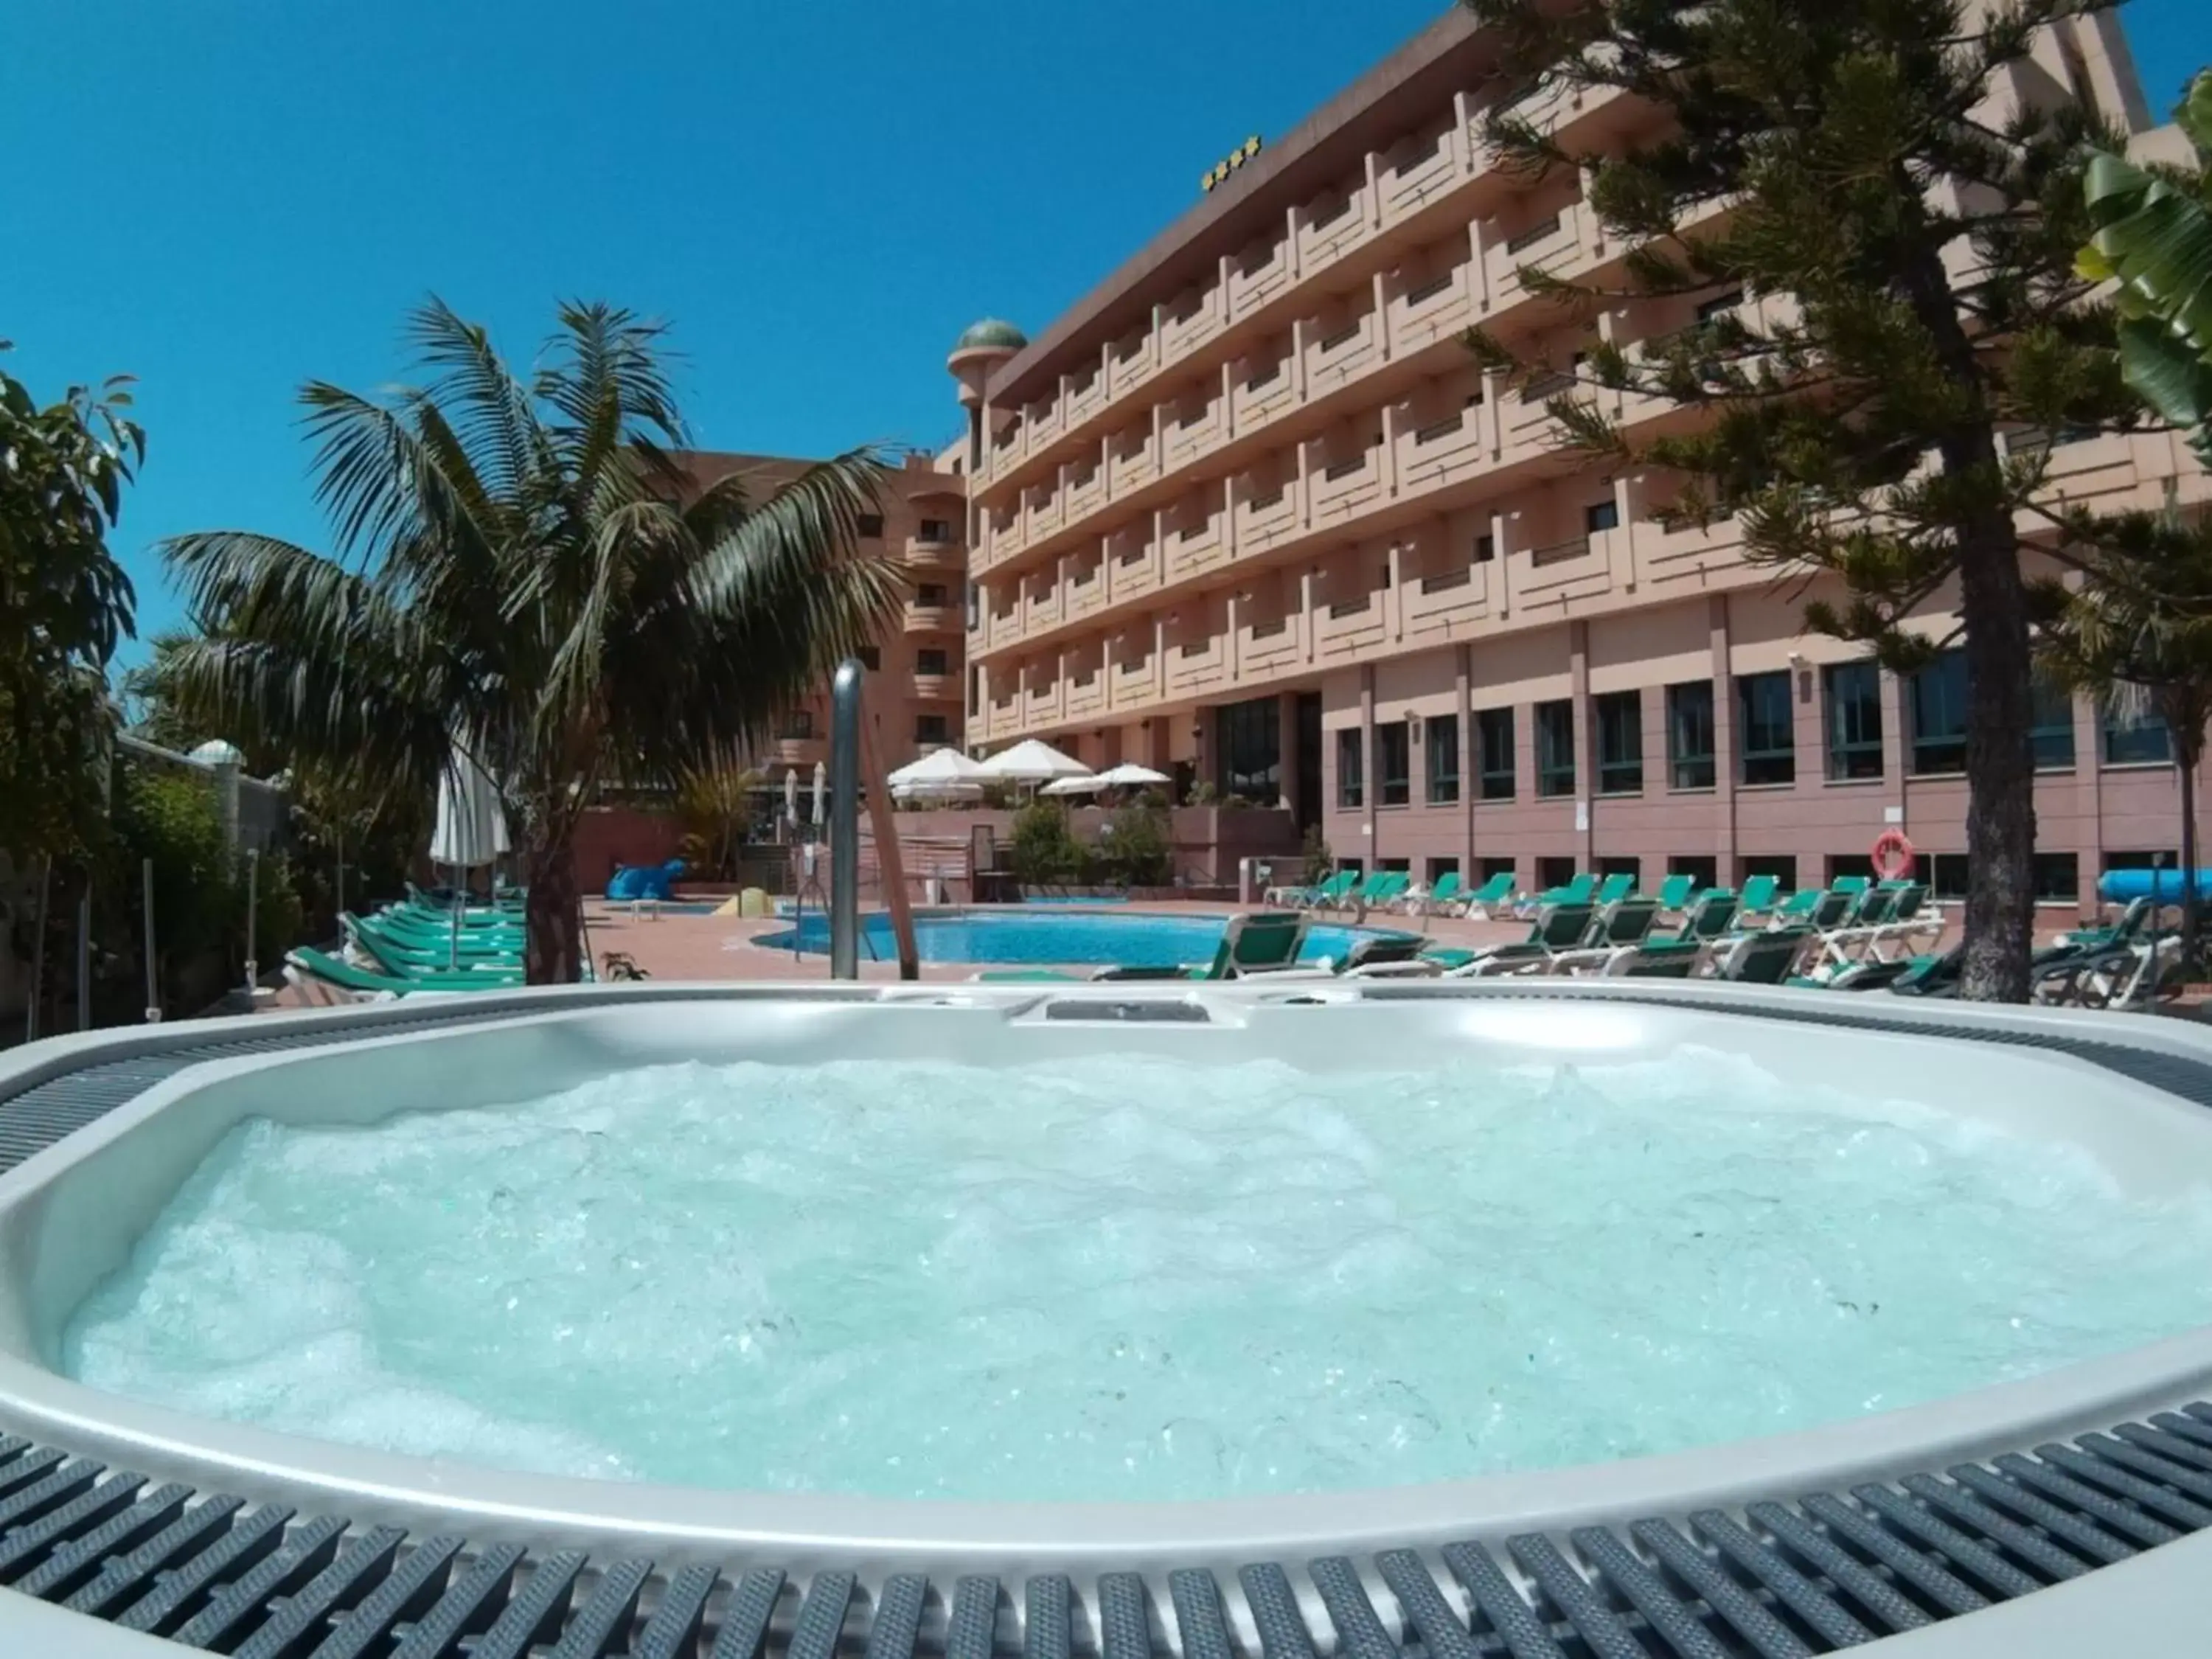 Area and facilities in Hotel Victoria Playa